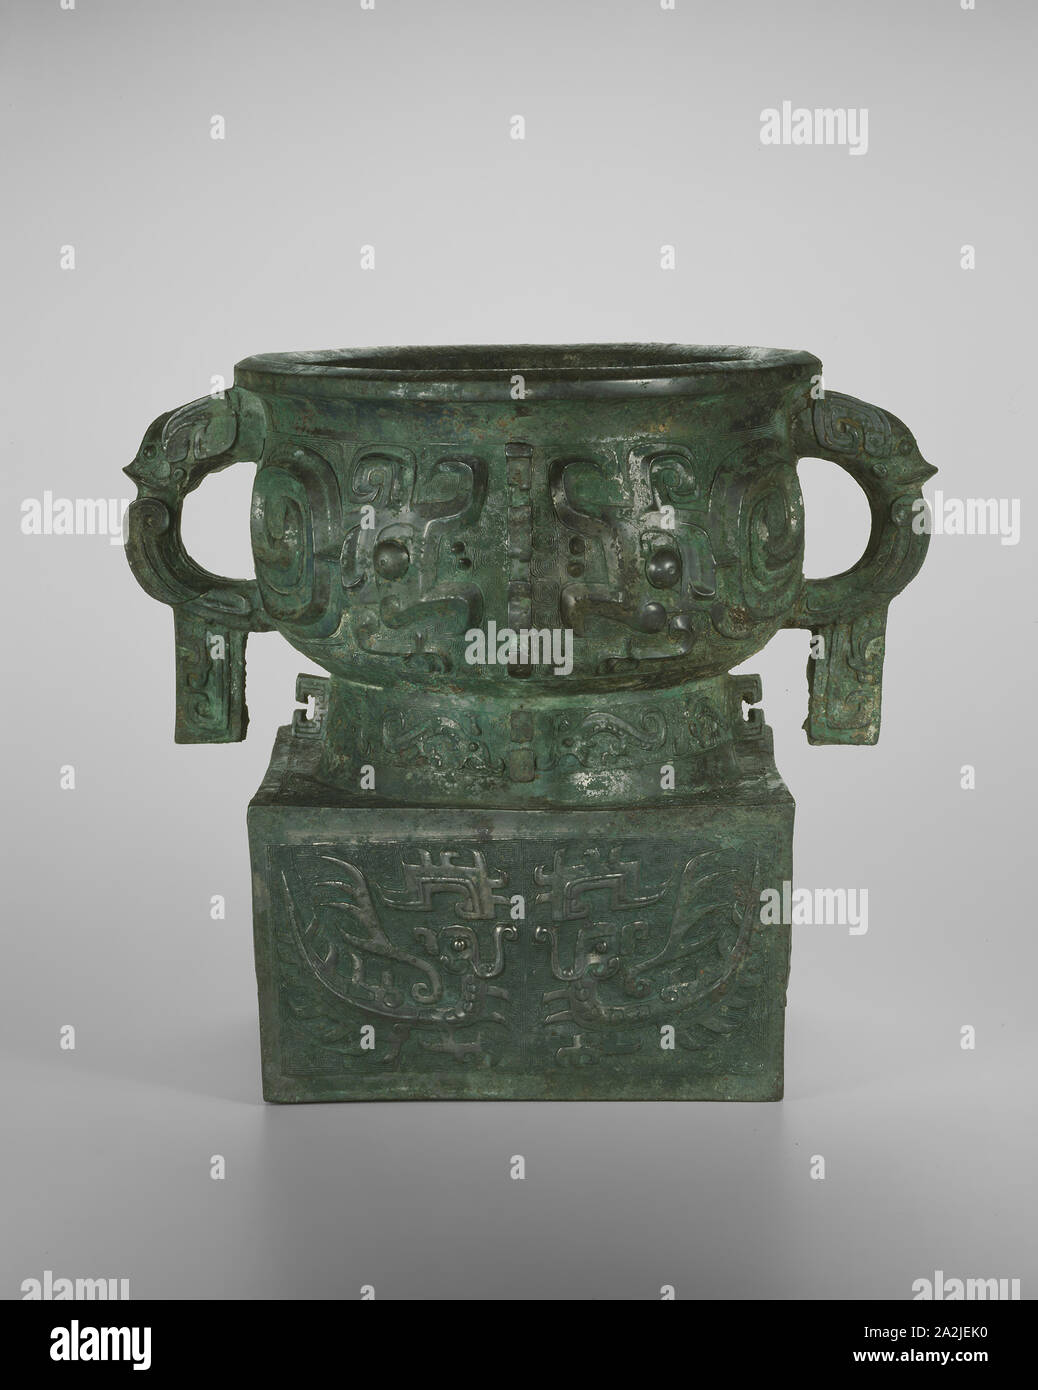 Food container, Western Zhou dynasty ( 1046–771 BC ), 2nd half of 11th century BC, China, Bronze, H. 27.0 cm (10 3/4 in.), diam. at lip: 22.2 cm (8 3/4 in Stock Photo